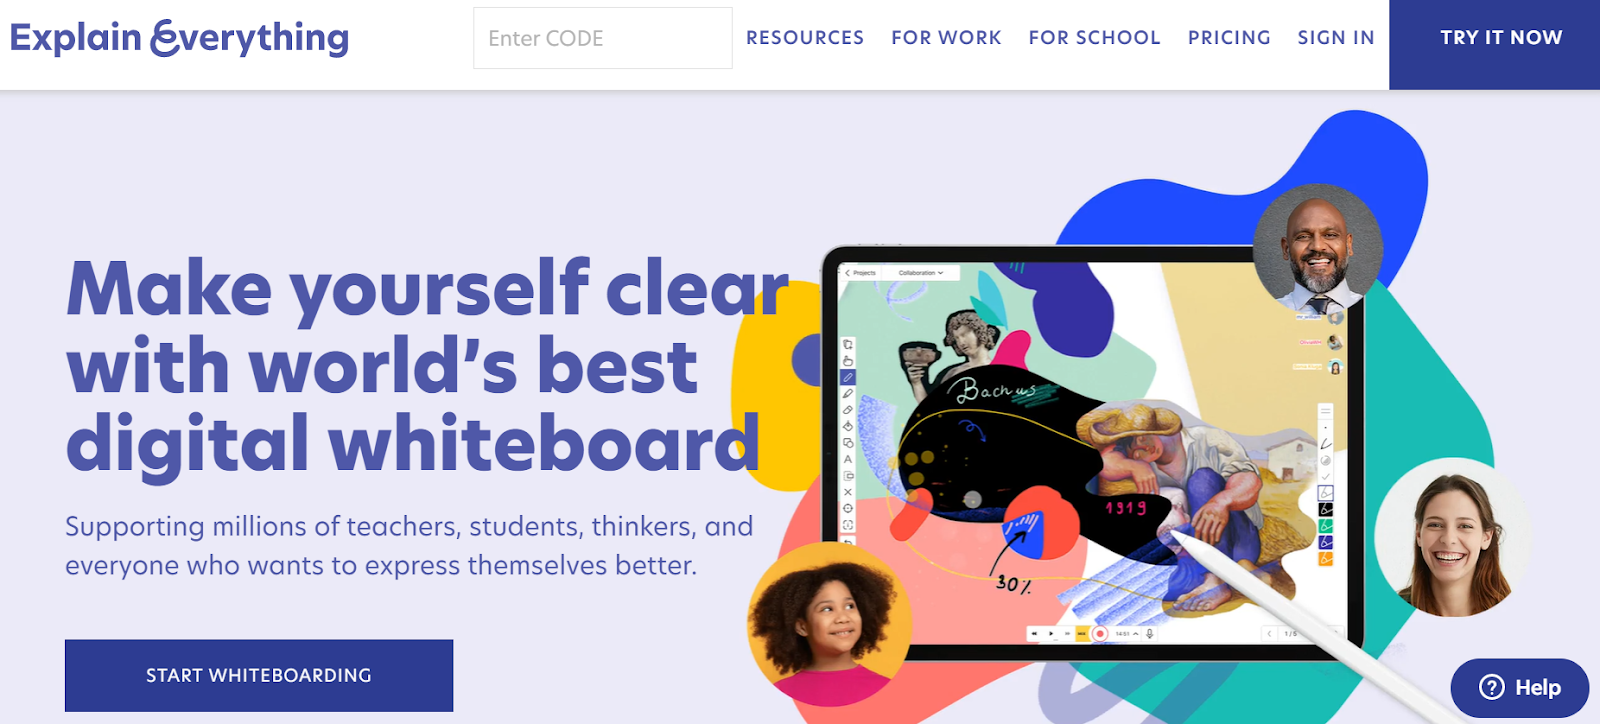 11 Best Online Whiteboard Tools For Any Purpose - Inkbot Design